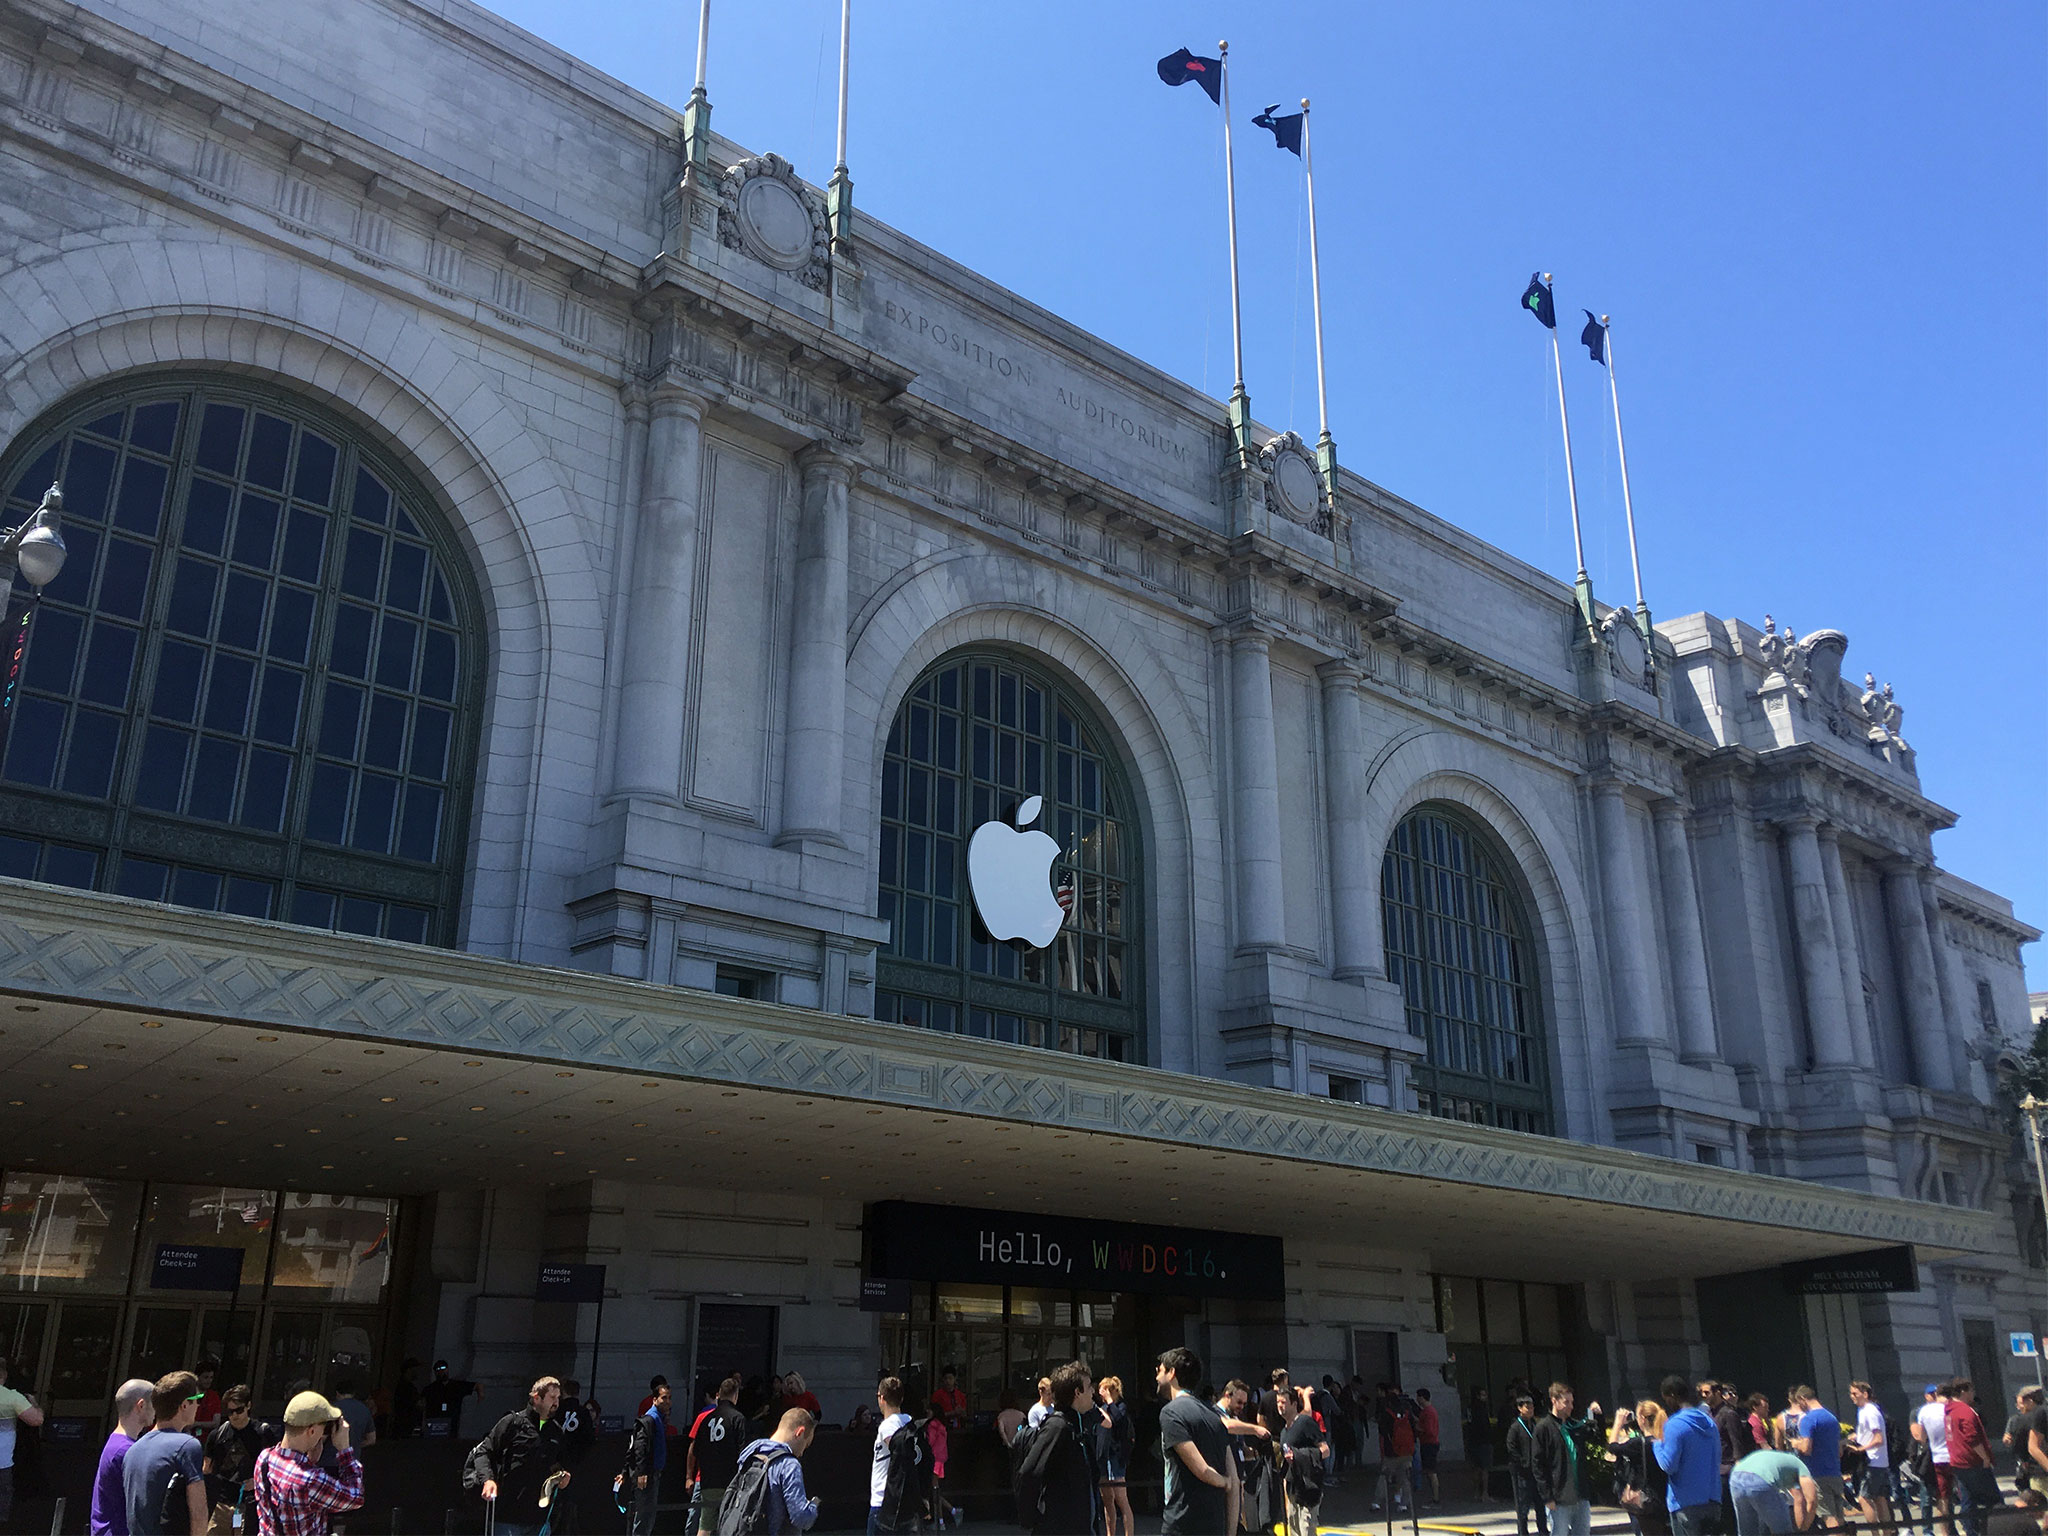 iOS 11 will be previewed at WWDC 2017 in June and ship with iPhone 8 this fall Wwdc-2016-bill-graham